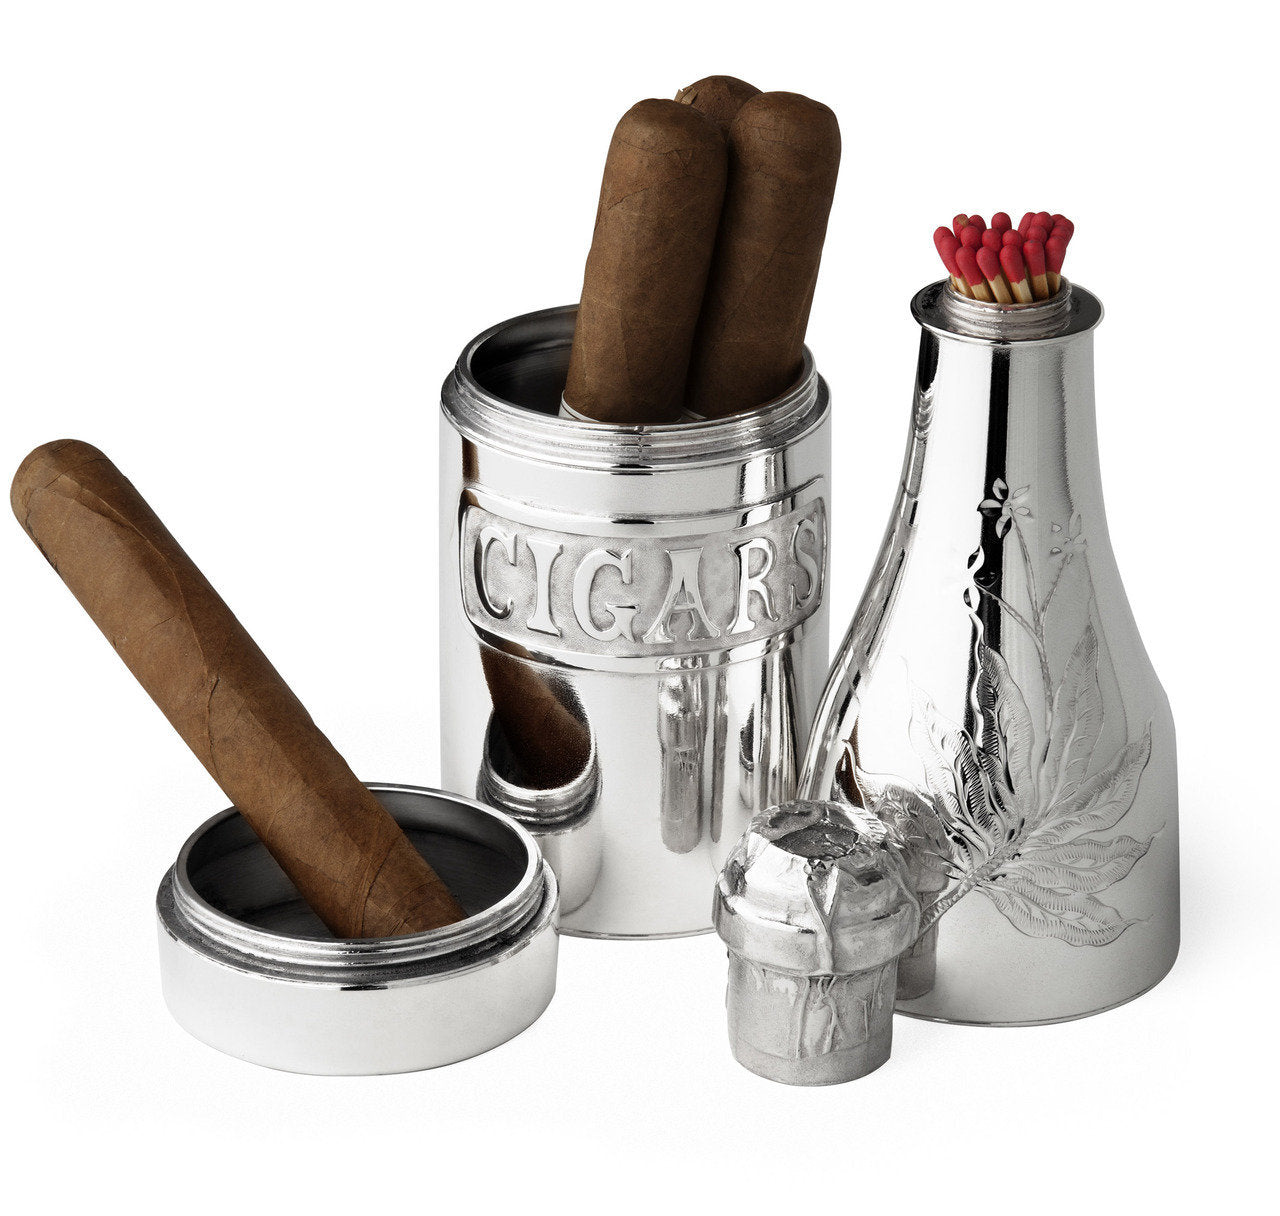 Pairpoint Silver-Plated Champagne Bottle Form Cigar Humidor